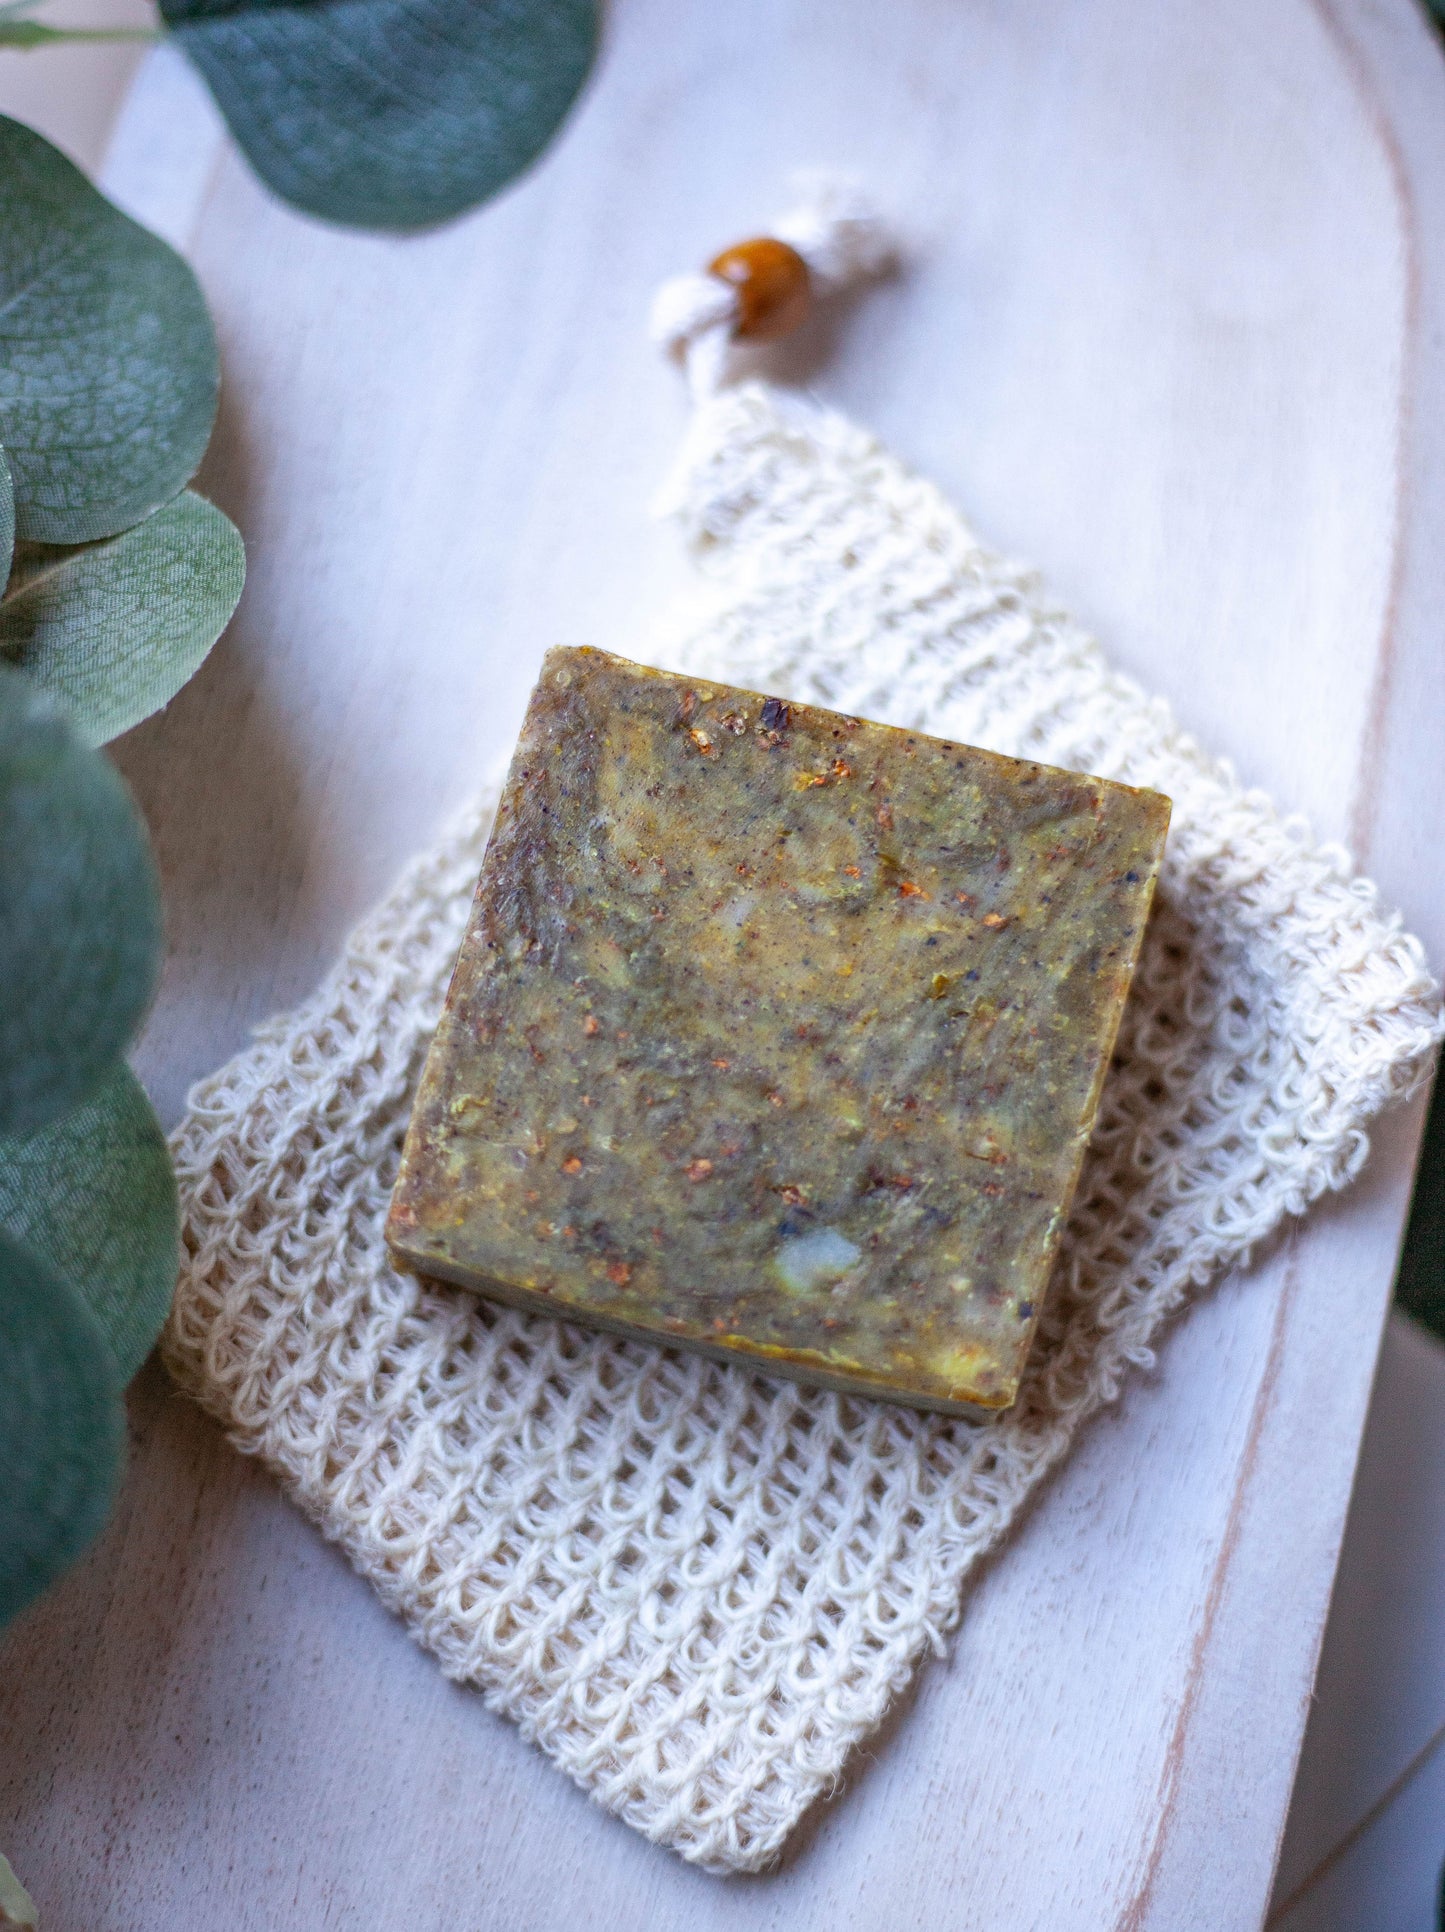 Groovy Patchouli Exfoliating Shea Butter Soap